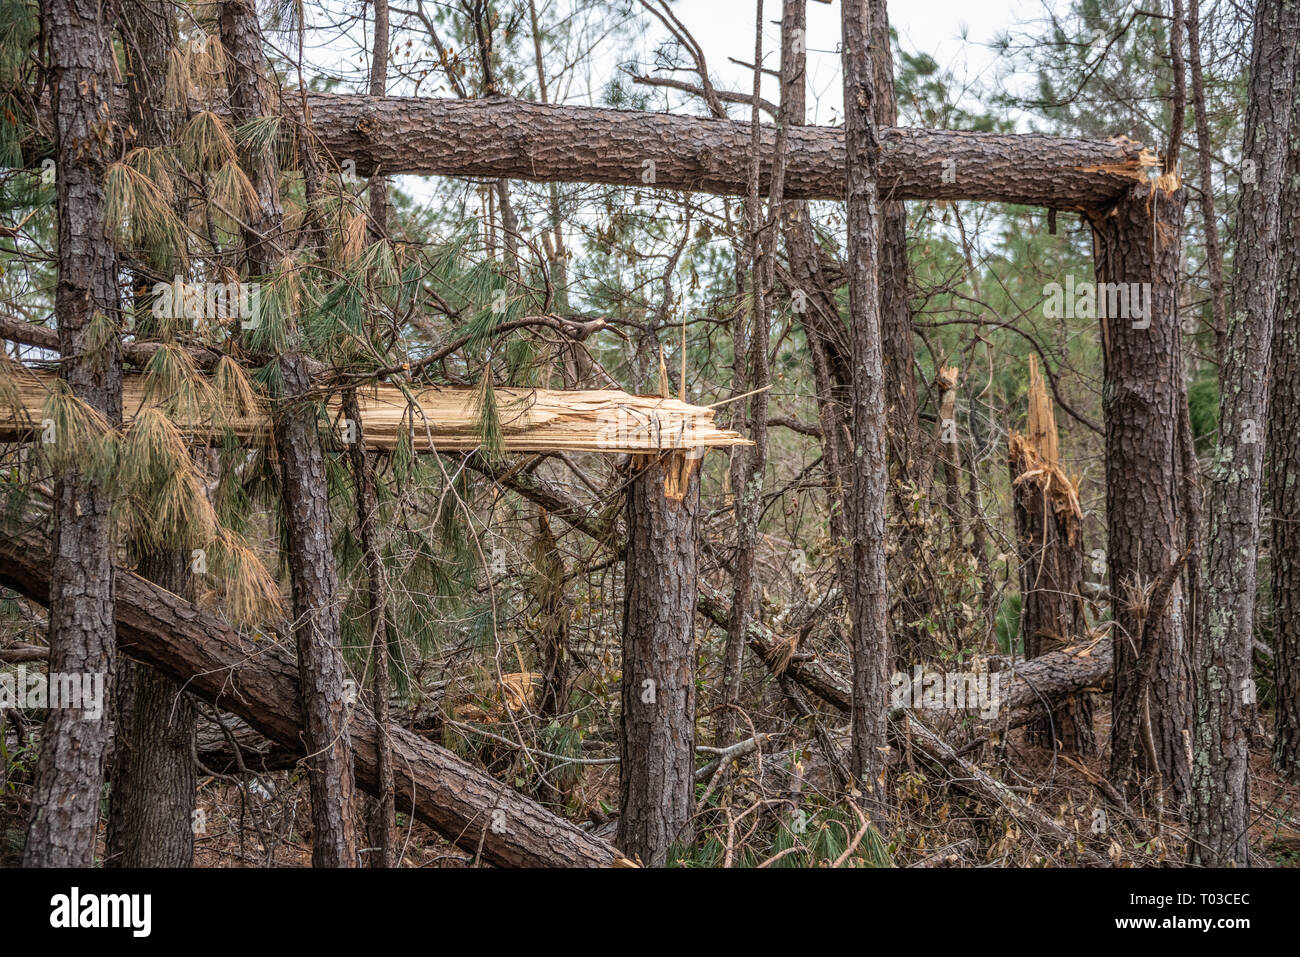 Snapped trees from the deadly tornado that passed through Lee County, Alabama on March 3, 2019. (USA) Stock Photo